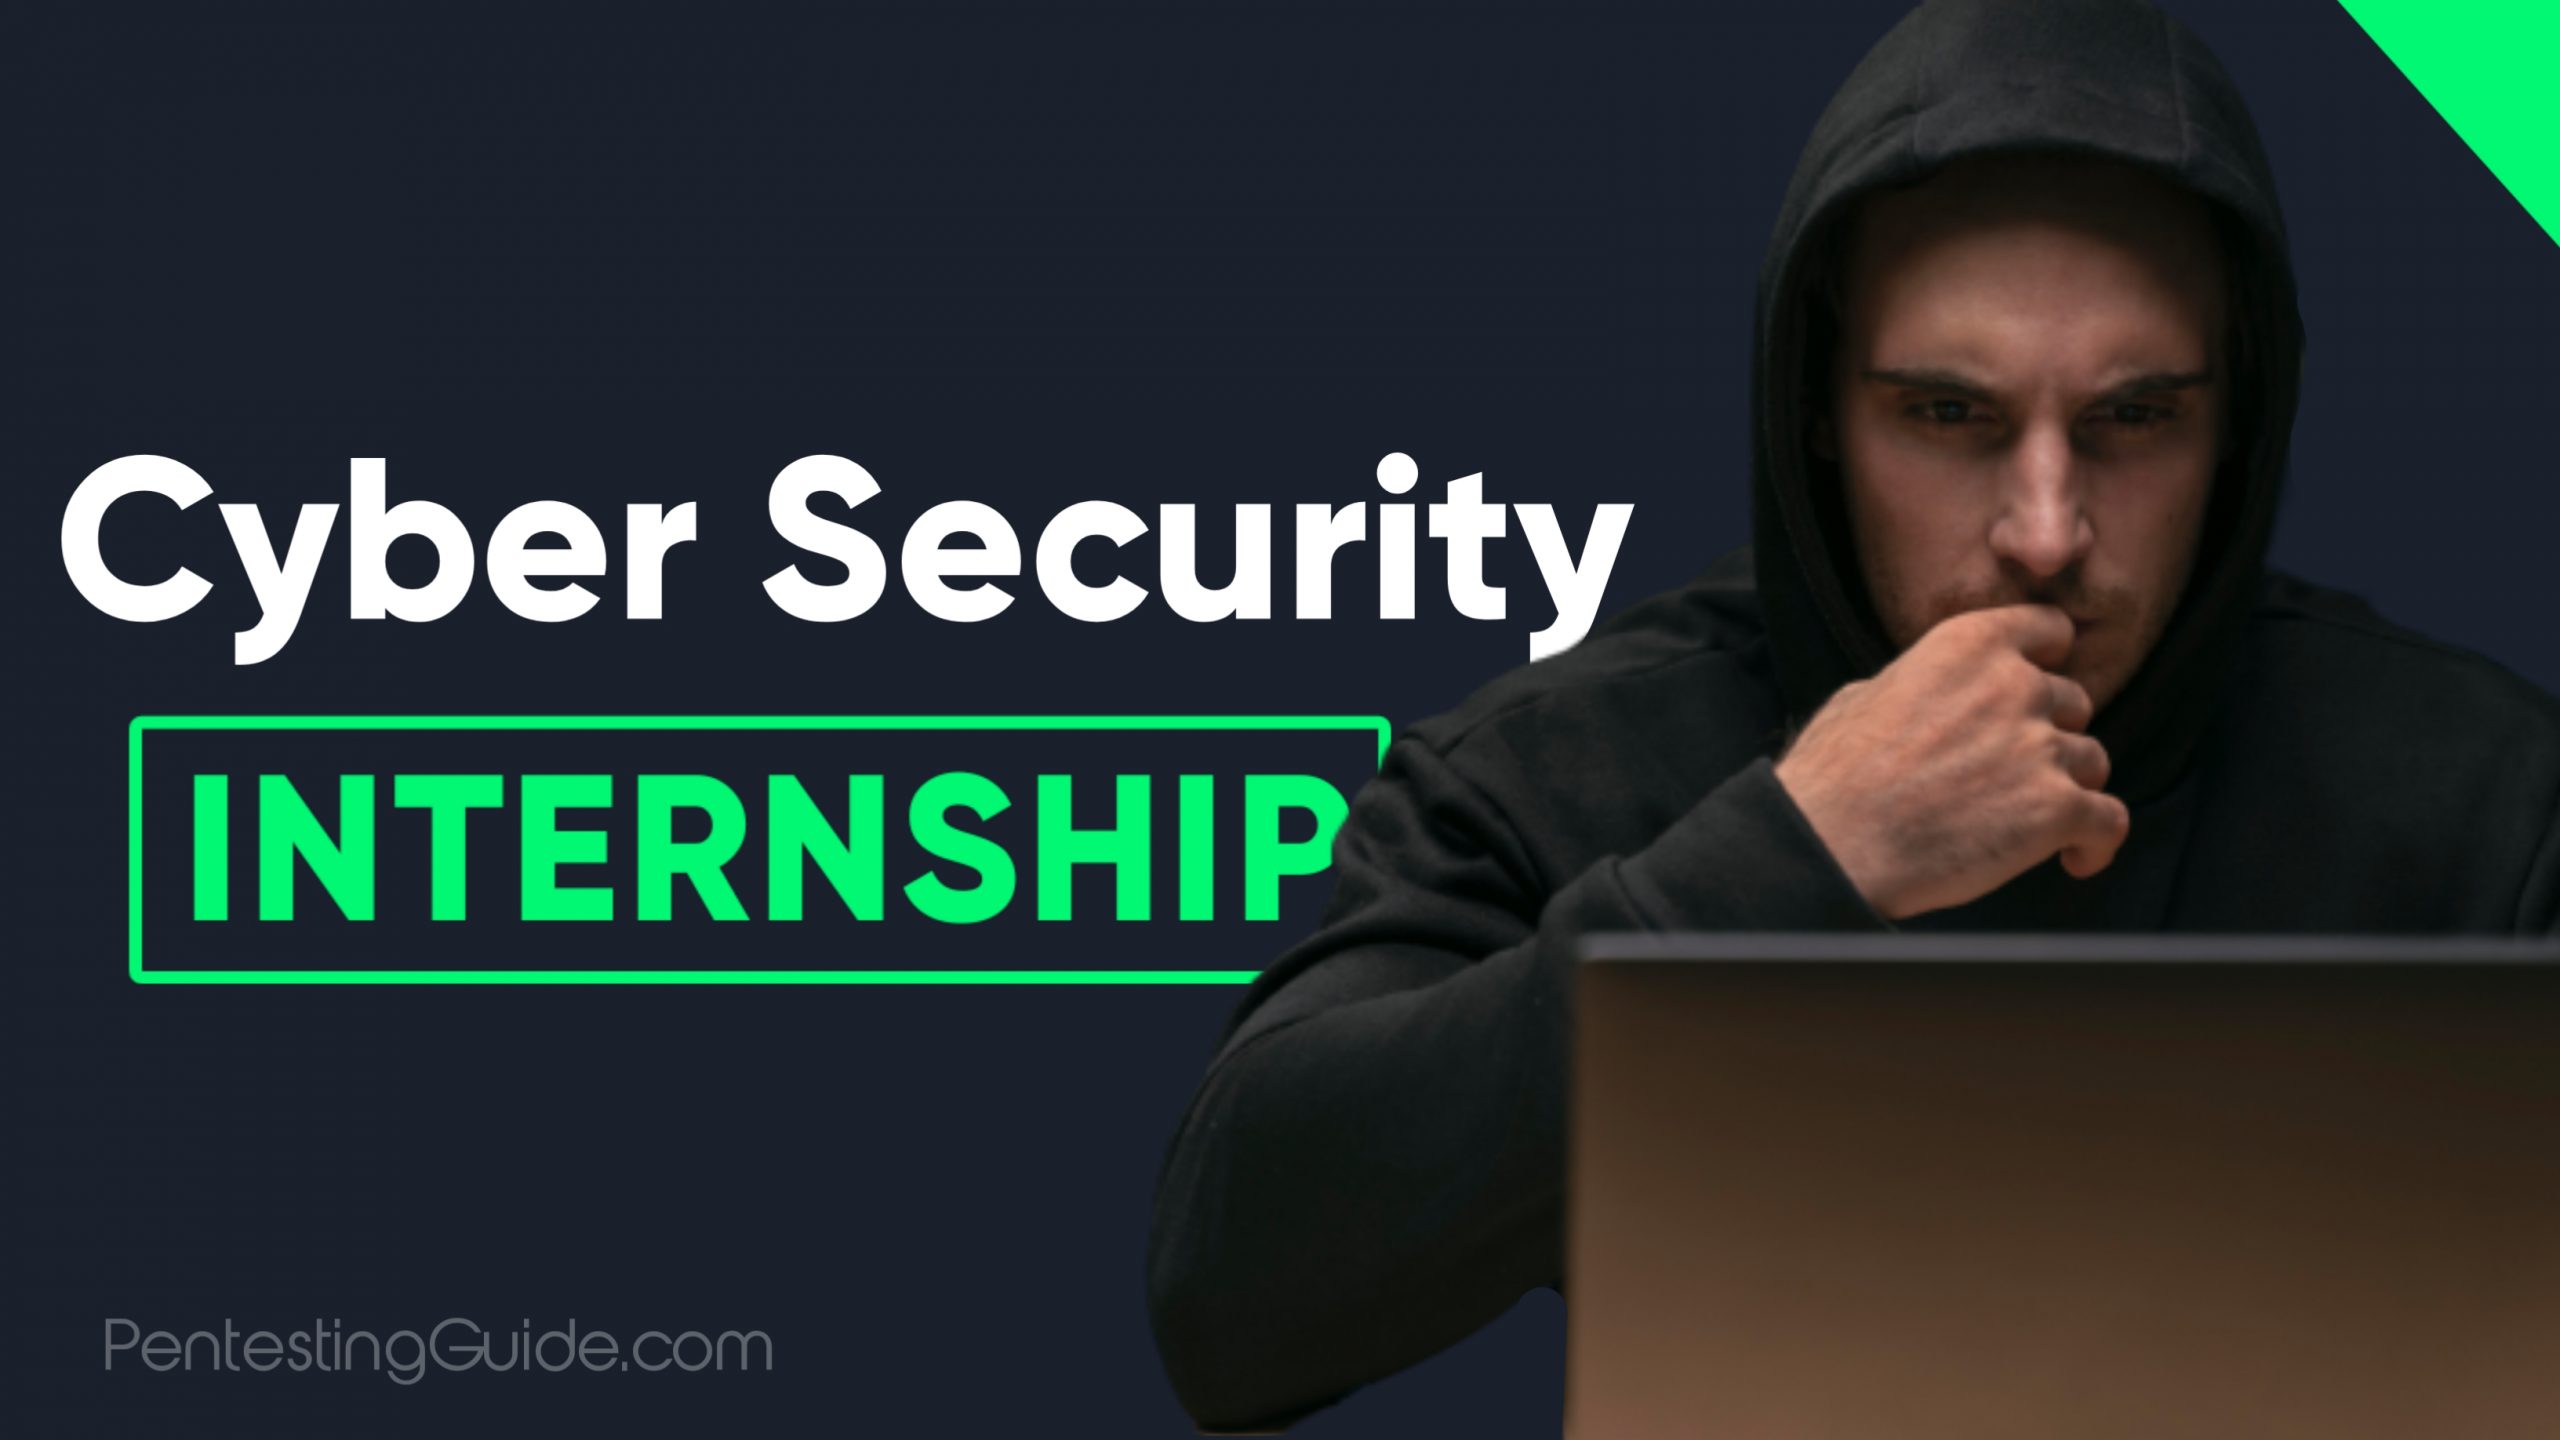 How to get cyber security internship